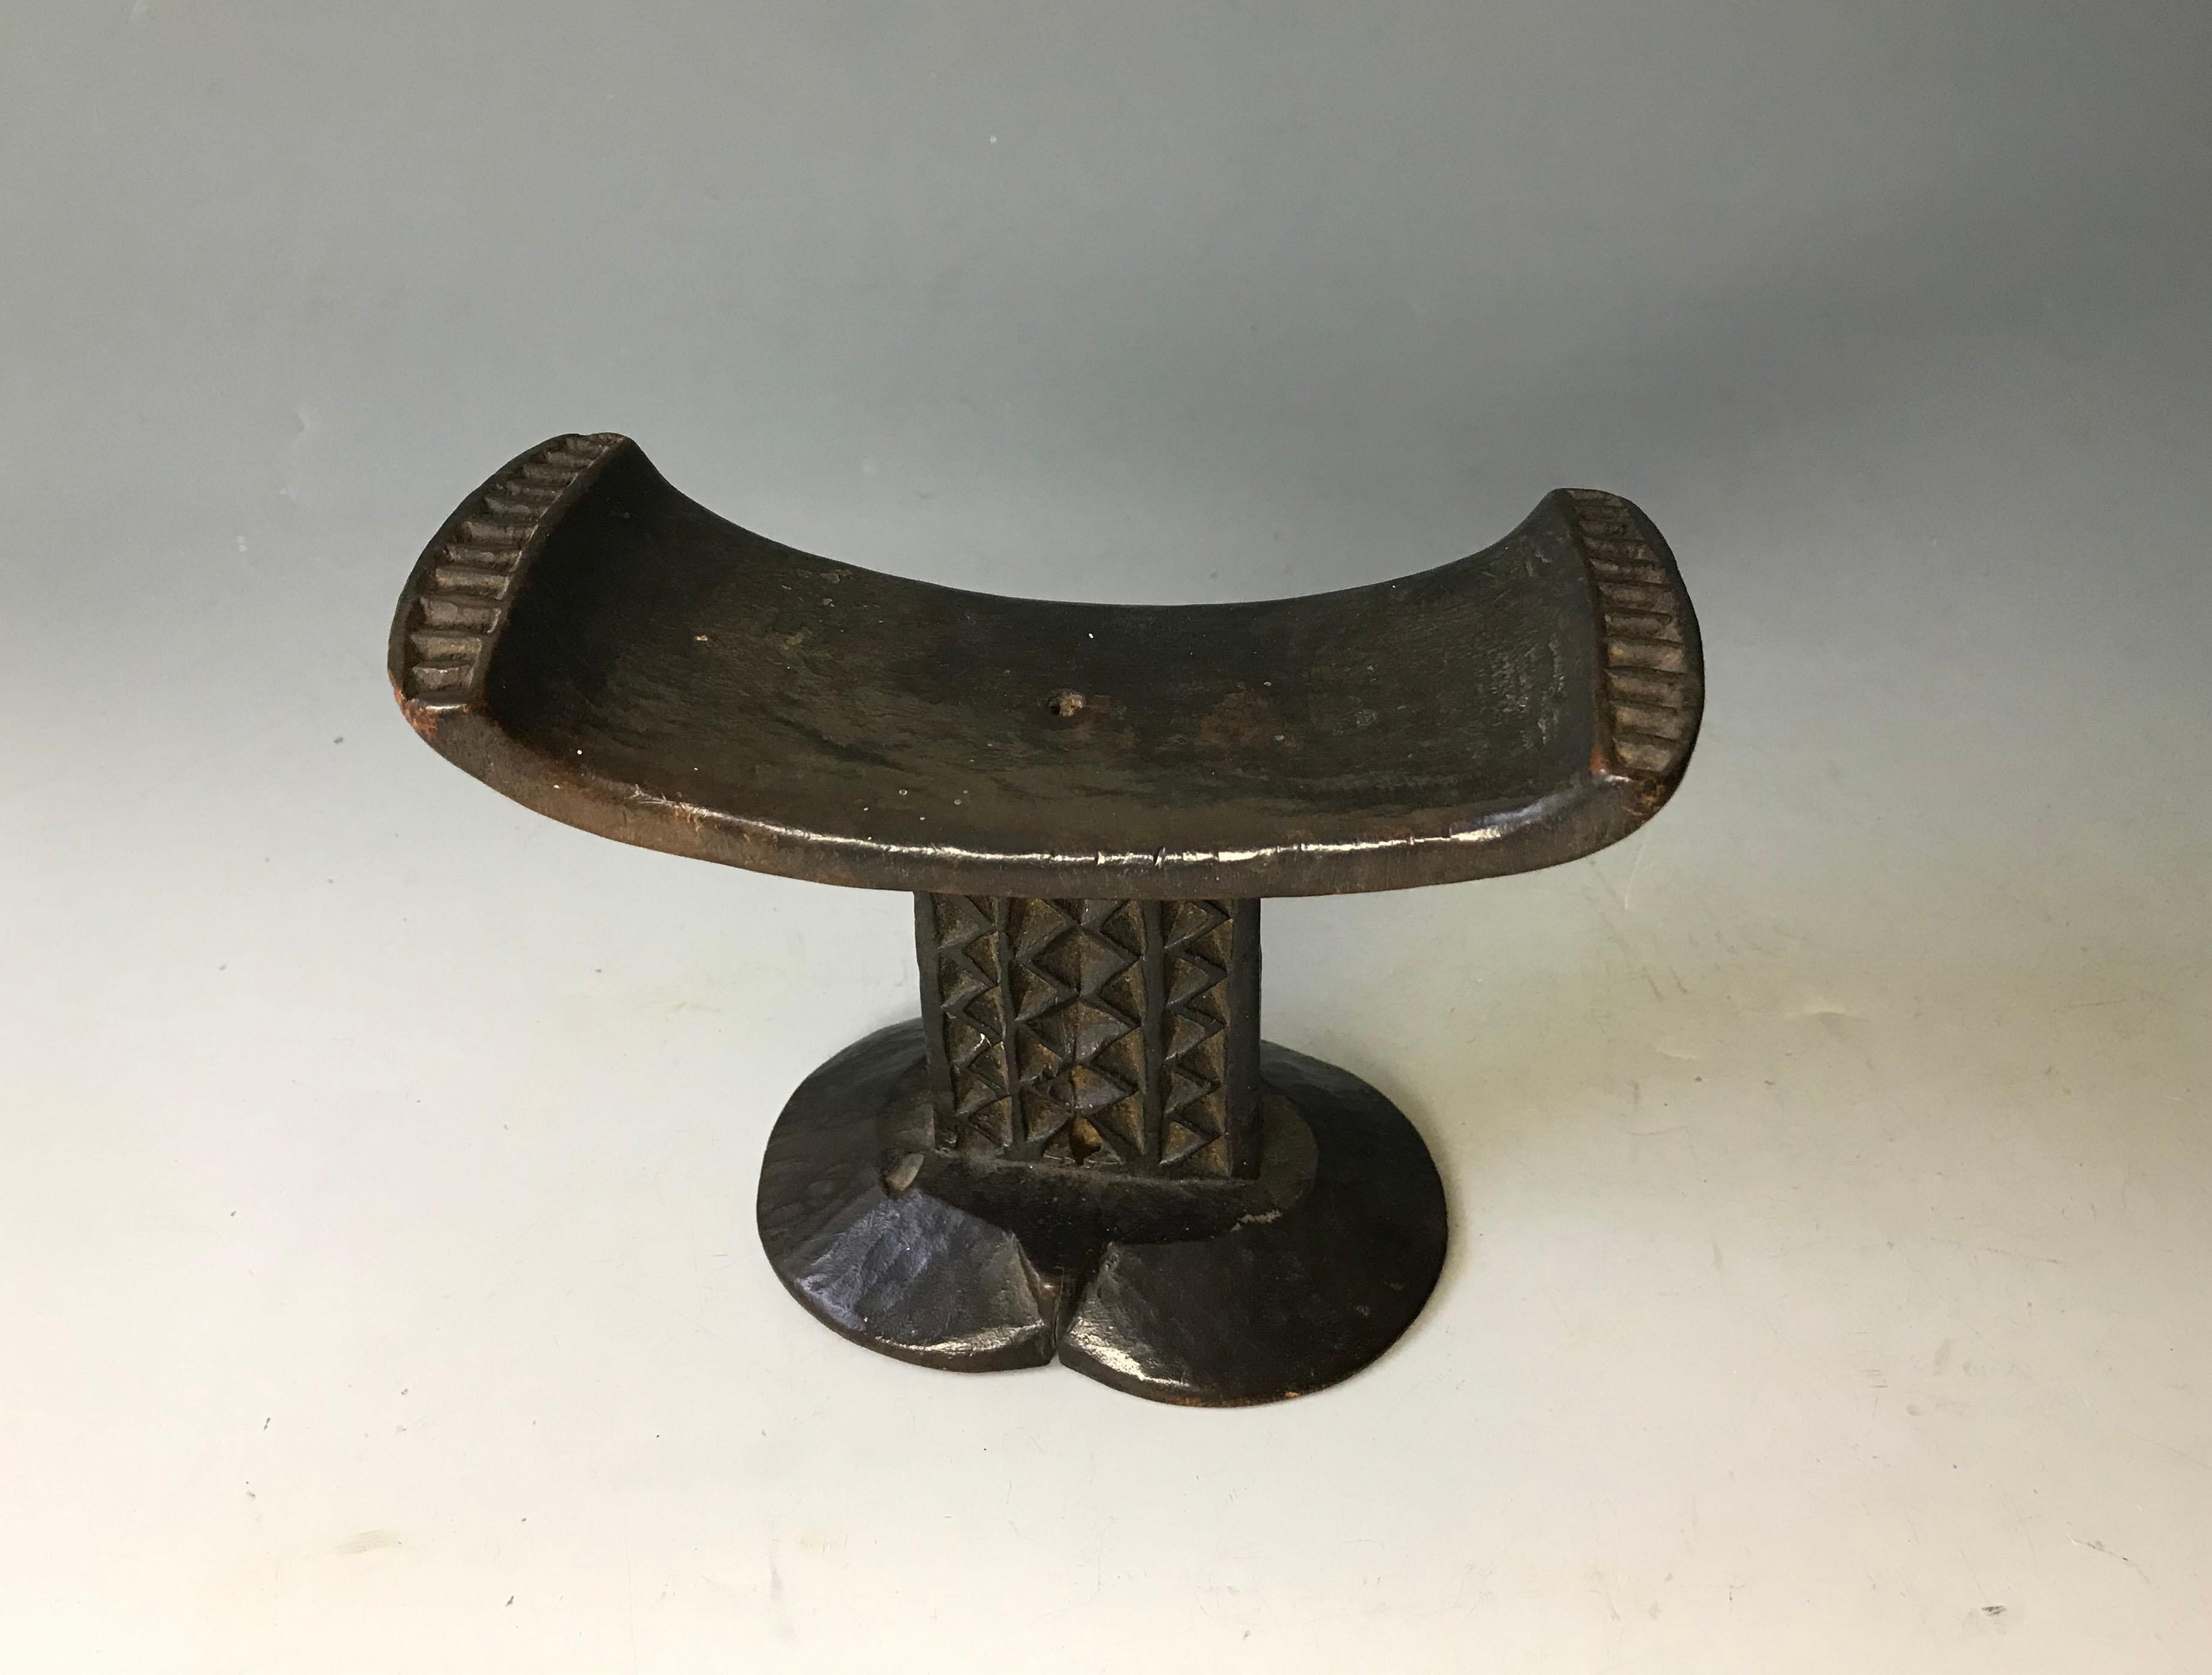 A fine shona head rest neck rest
Raised on a single central pillar finely carved with geometric designs
Shona Zimbabwe
Measures: Height 5 inches, width 6 inches 12.5 x 15 cm approx.
Period late 19th century
Ex Belgian Collection

The Shona